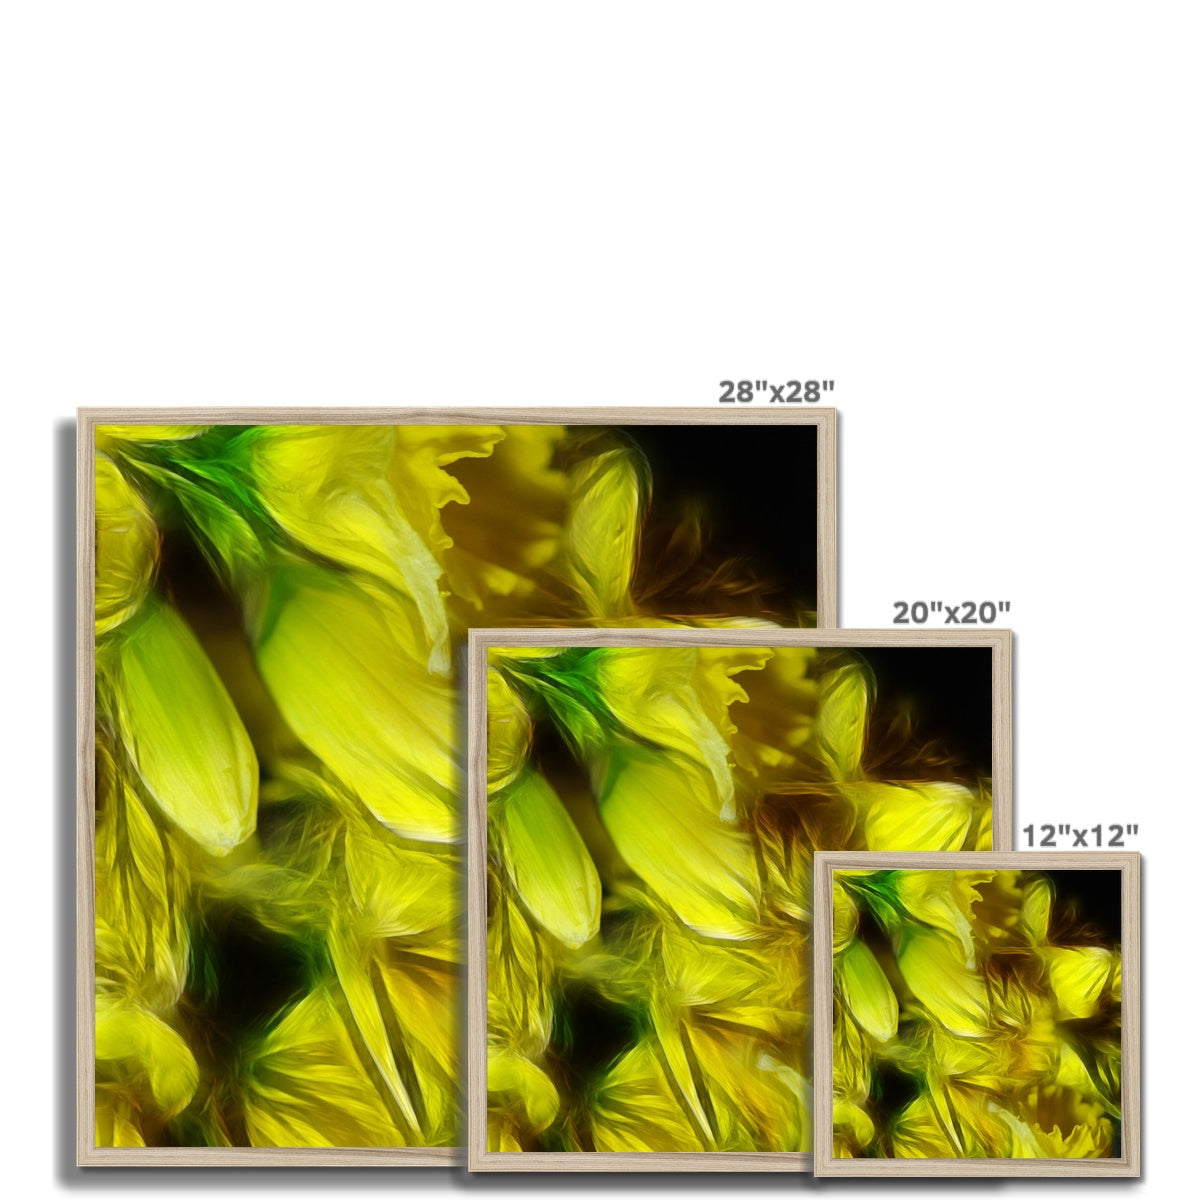 Abstract Yellow Daffodils Framed Print